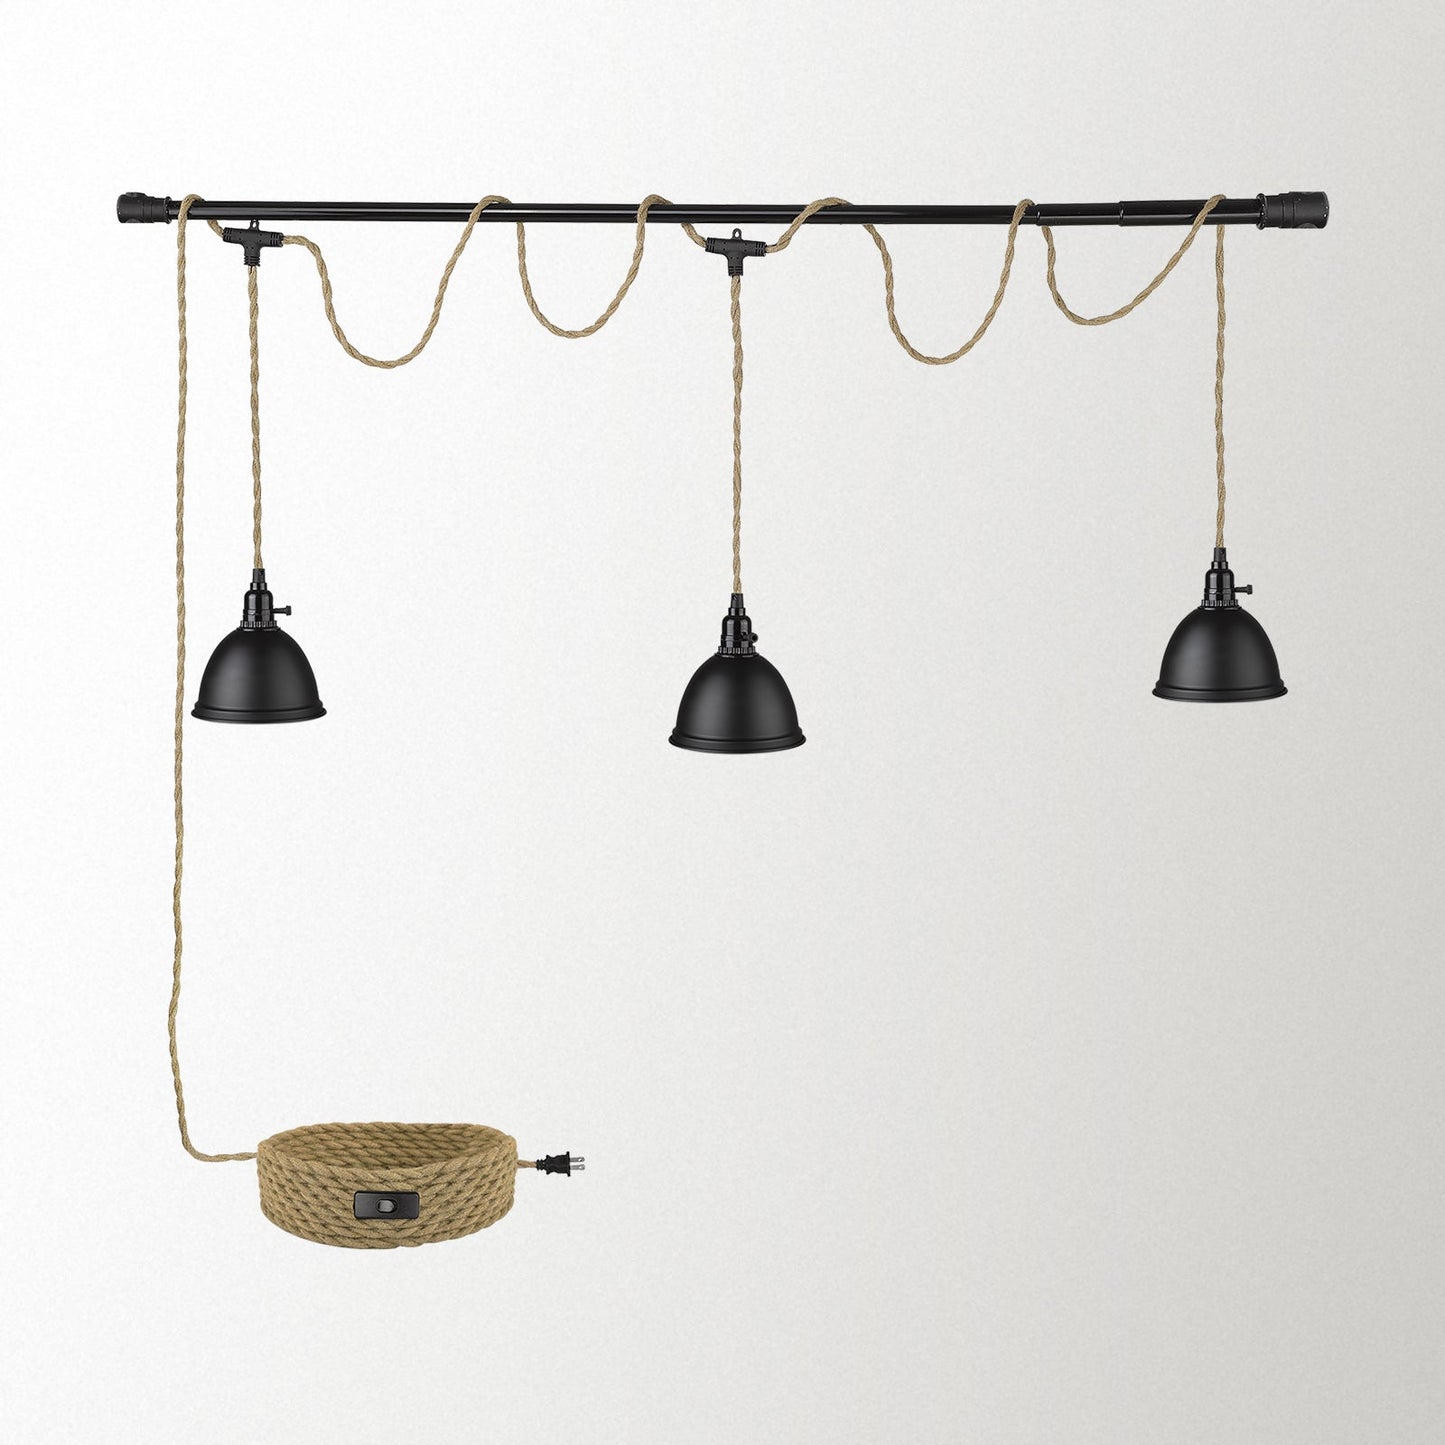 
                  
                    Emliviar Triple Pendant Light with Plug in Cord - 29FT Industrial Hanging Lamp with Twisted Hemp Rope Independent Switch, Black Finish, YCE240-3 BK
                  
                